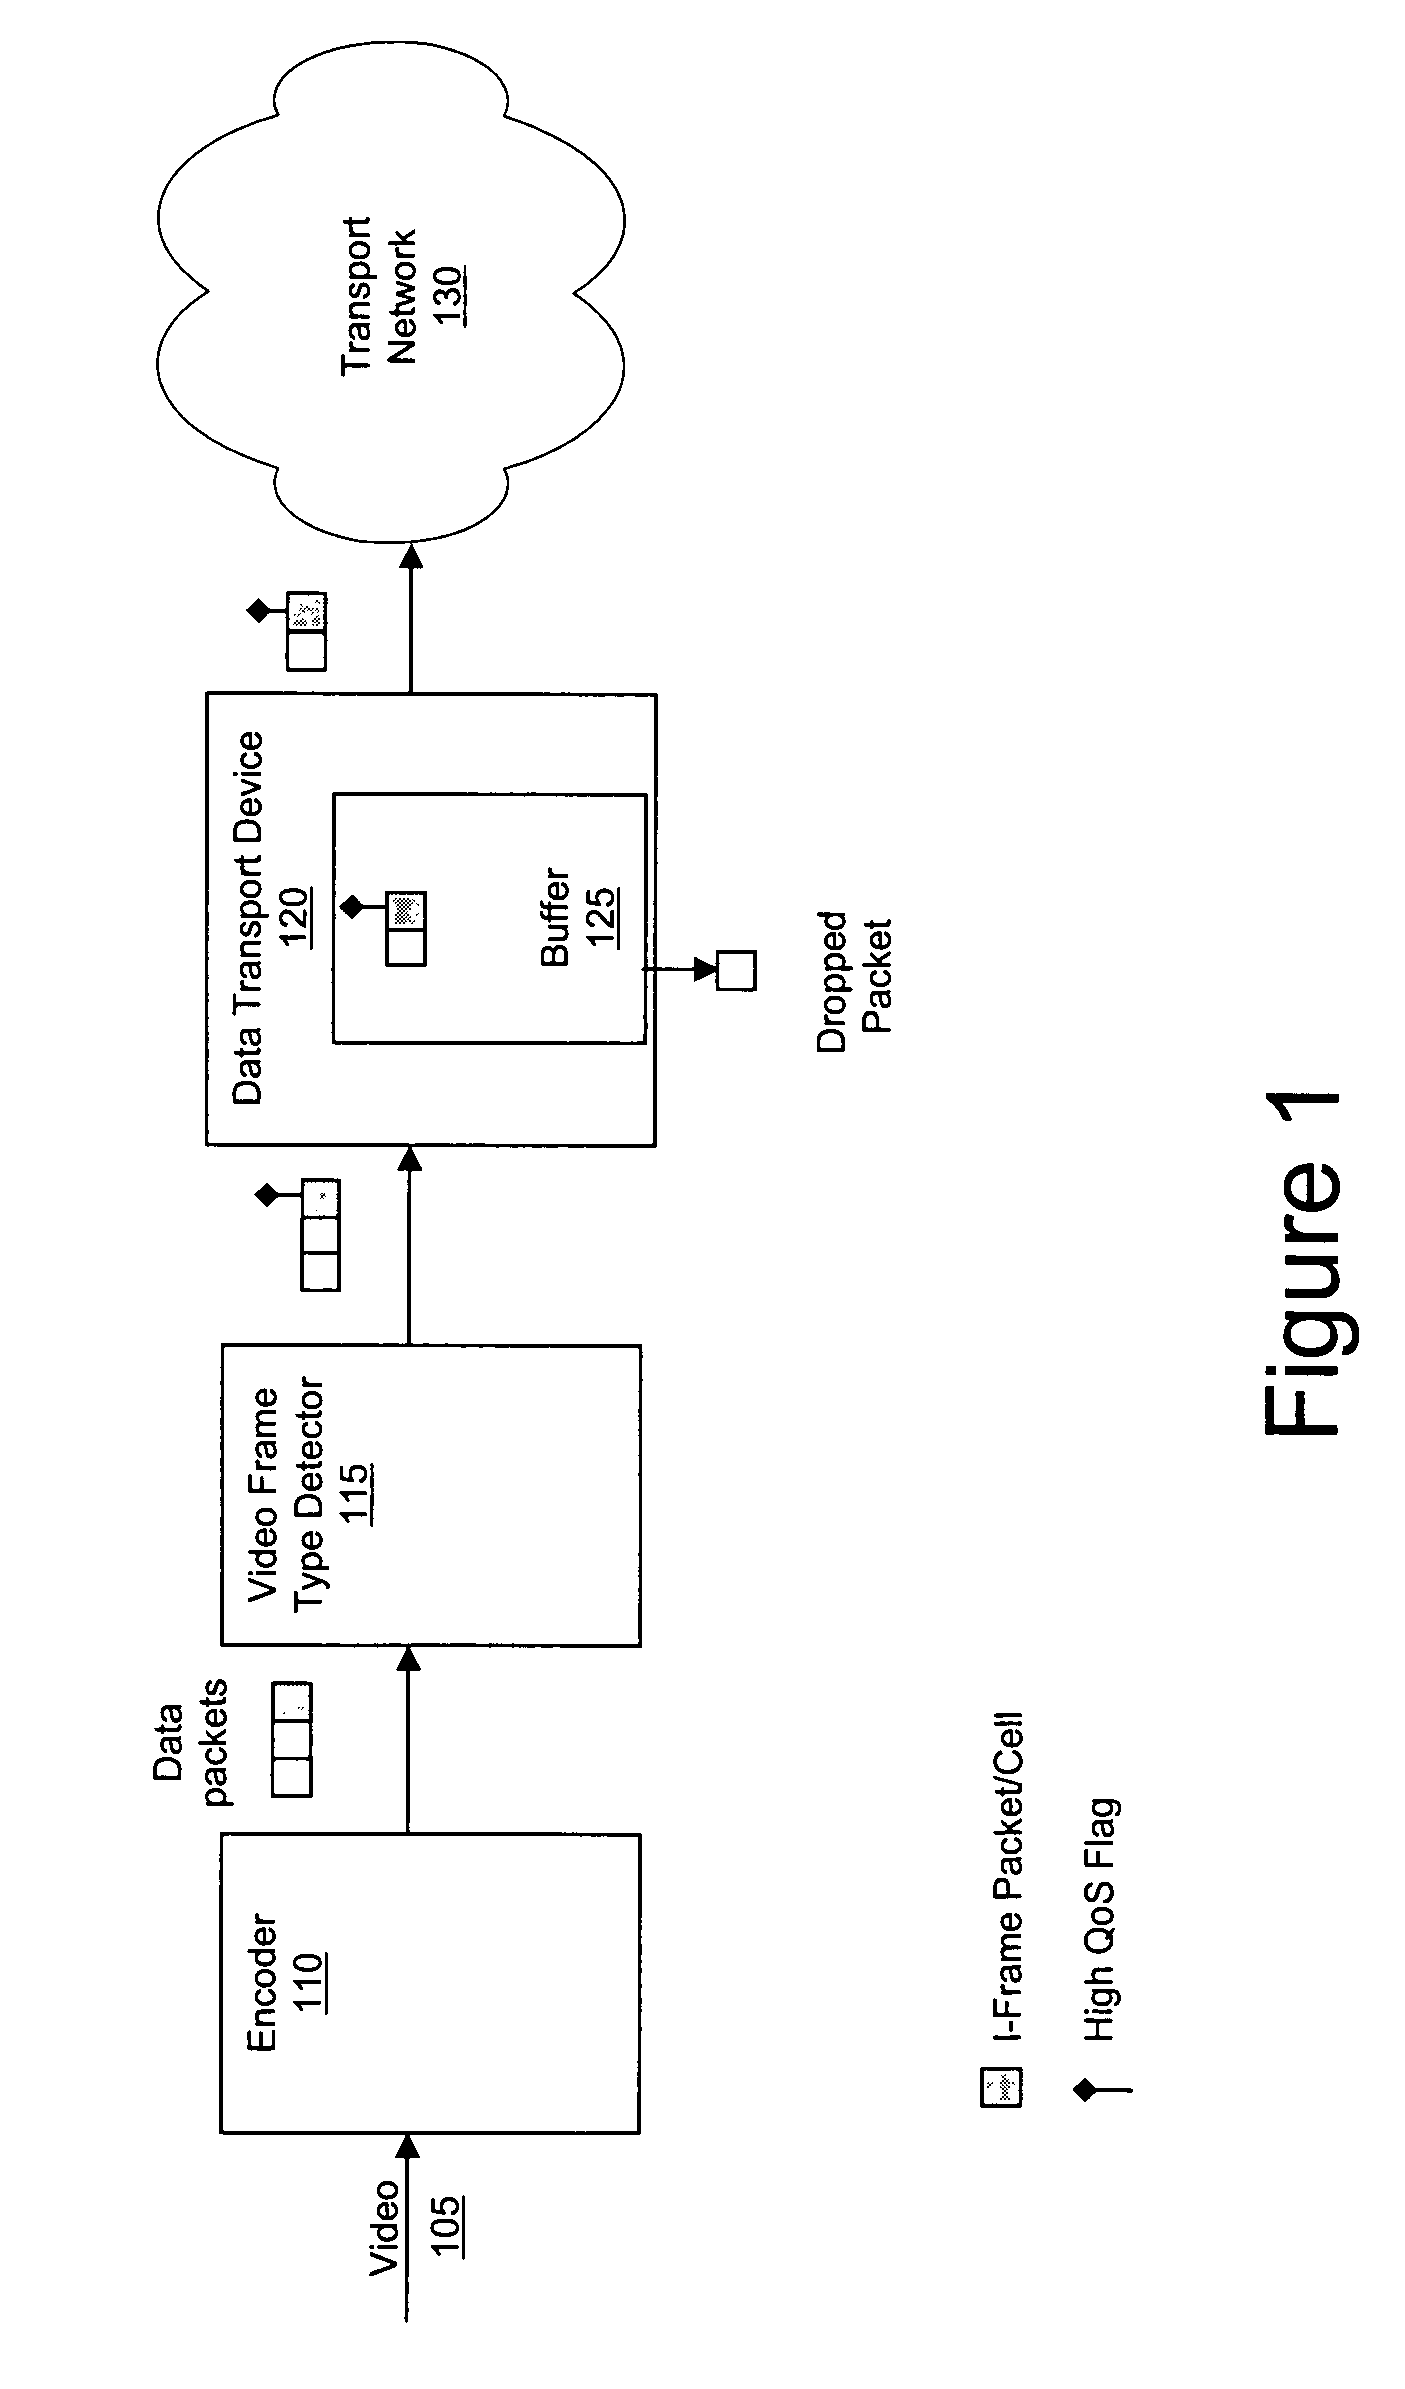 System and method for transmitting video information